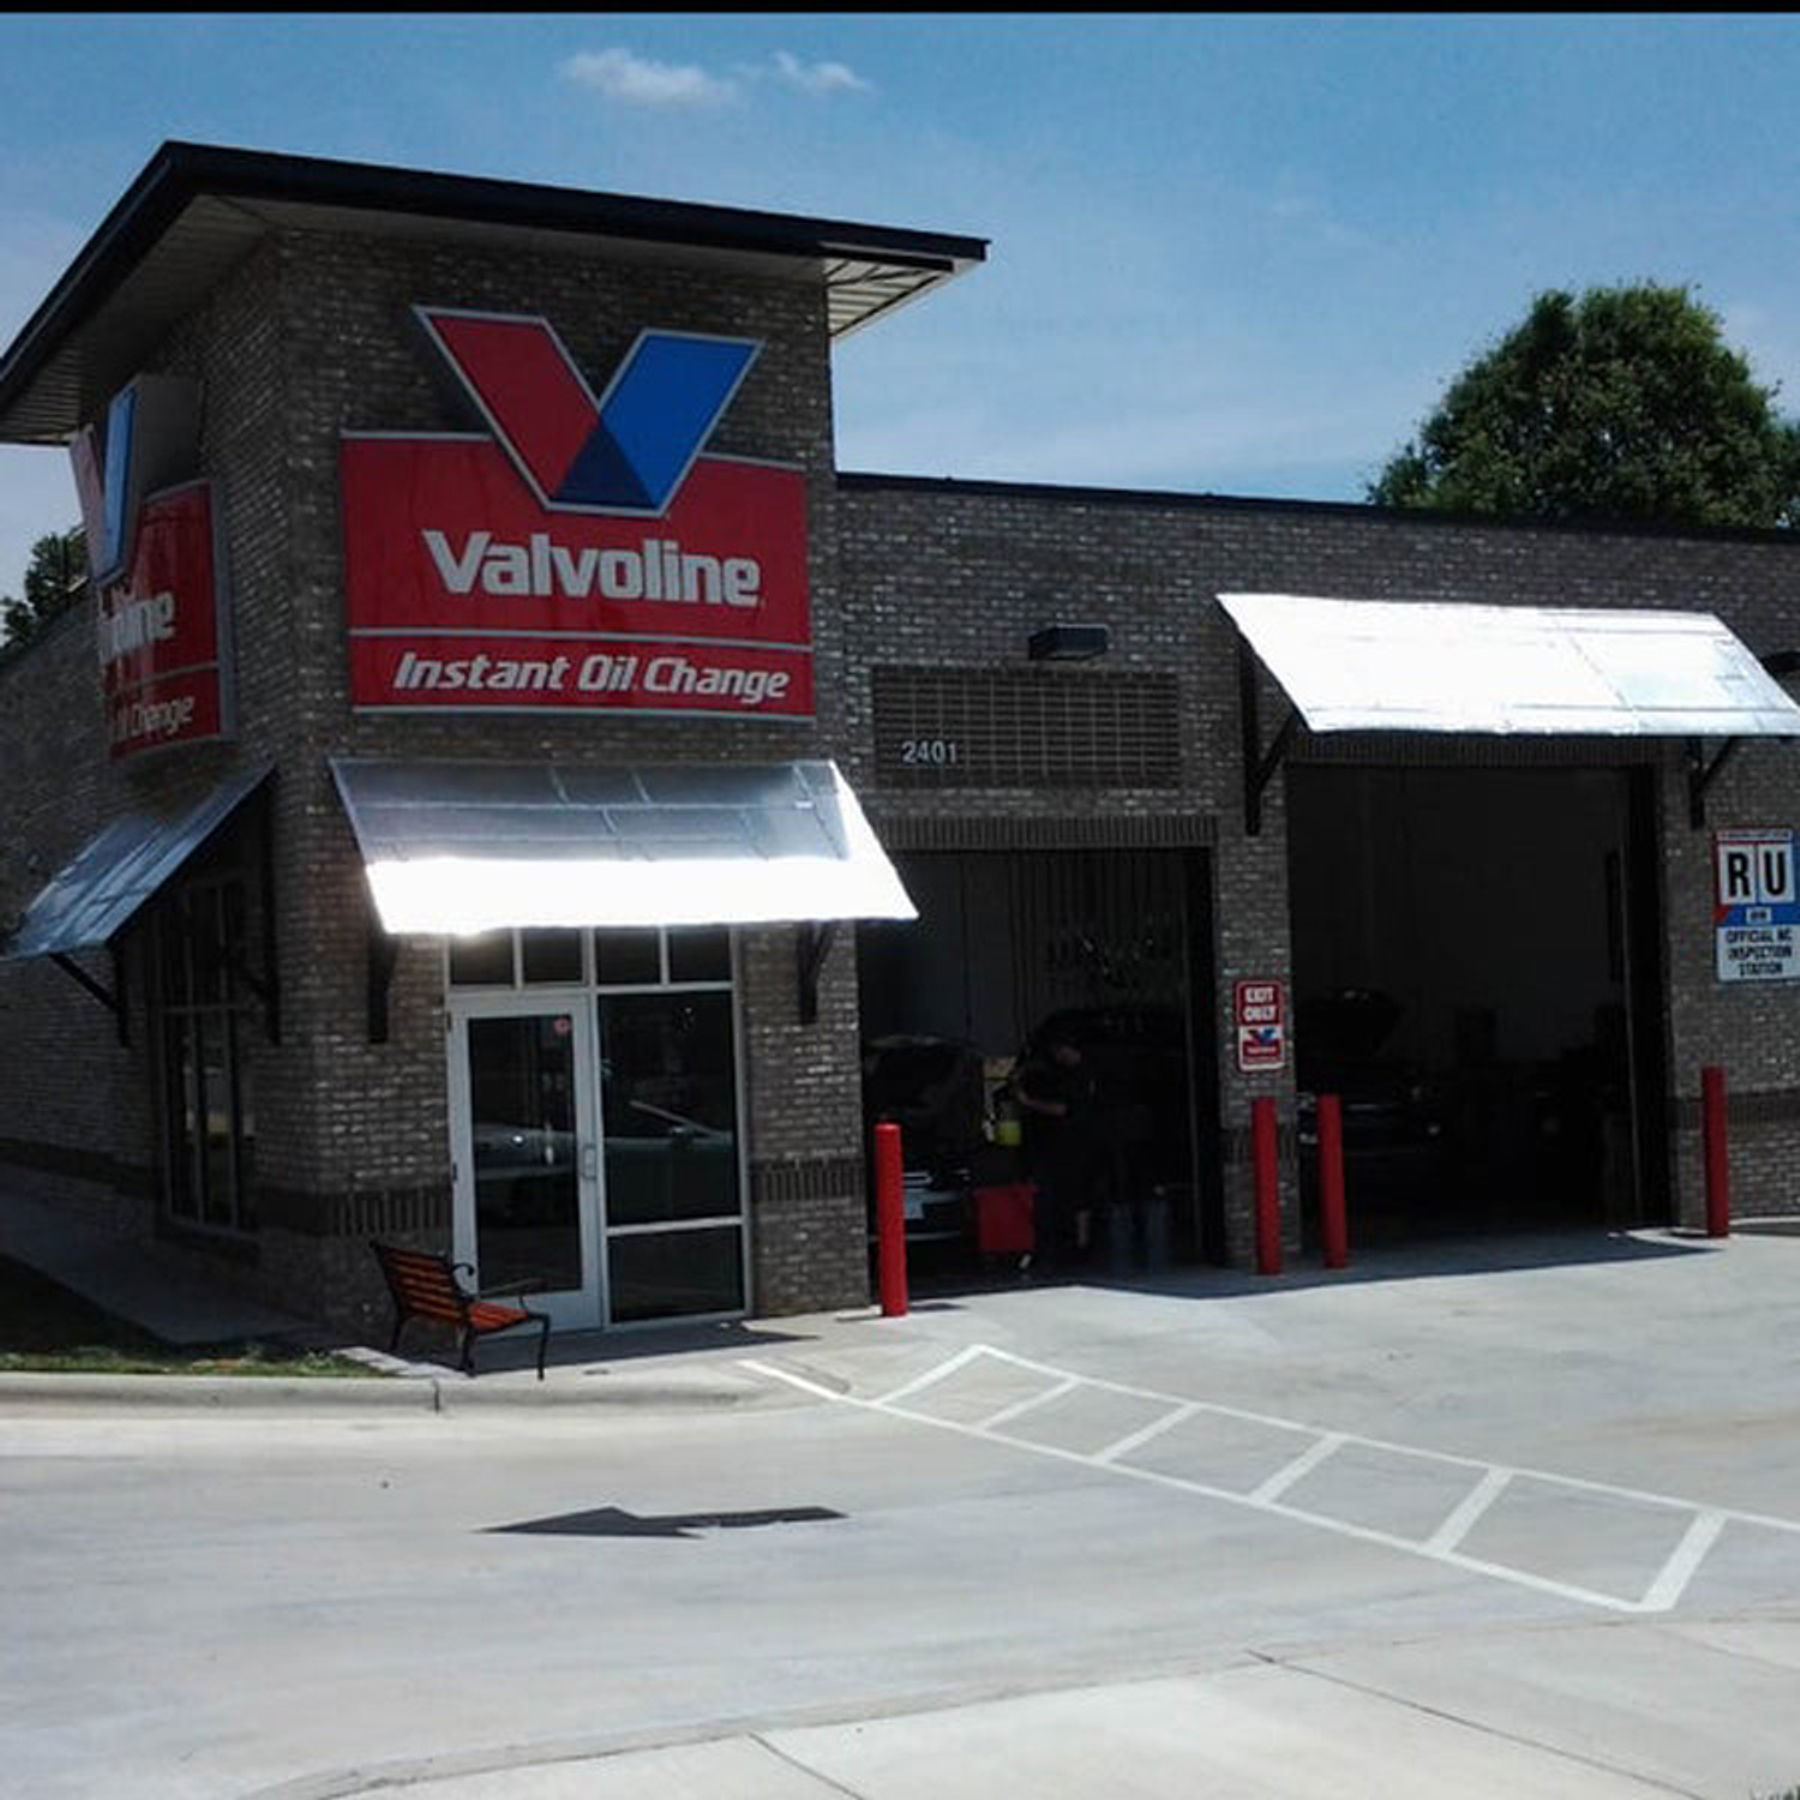 Valvoline Extended Protection Full Synthetic High Mileage Motor Oil SA